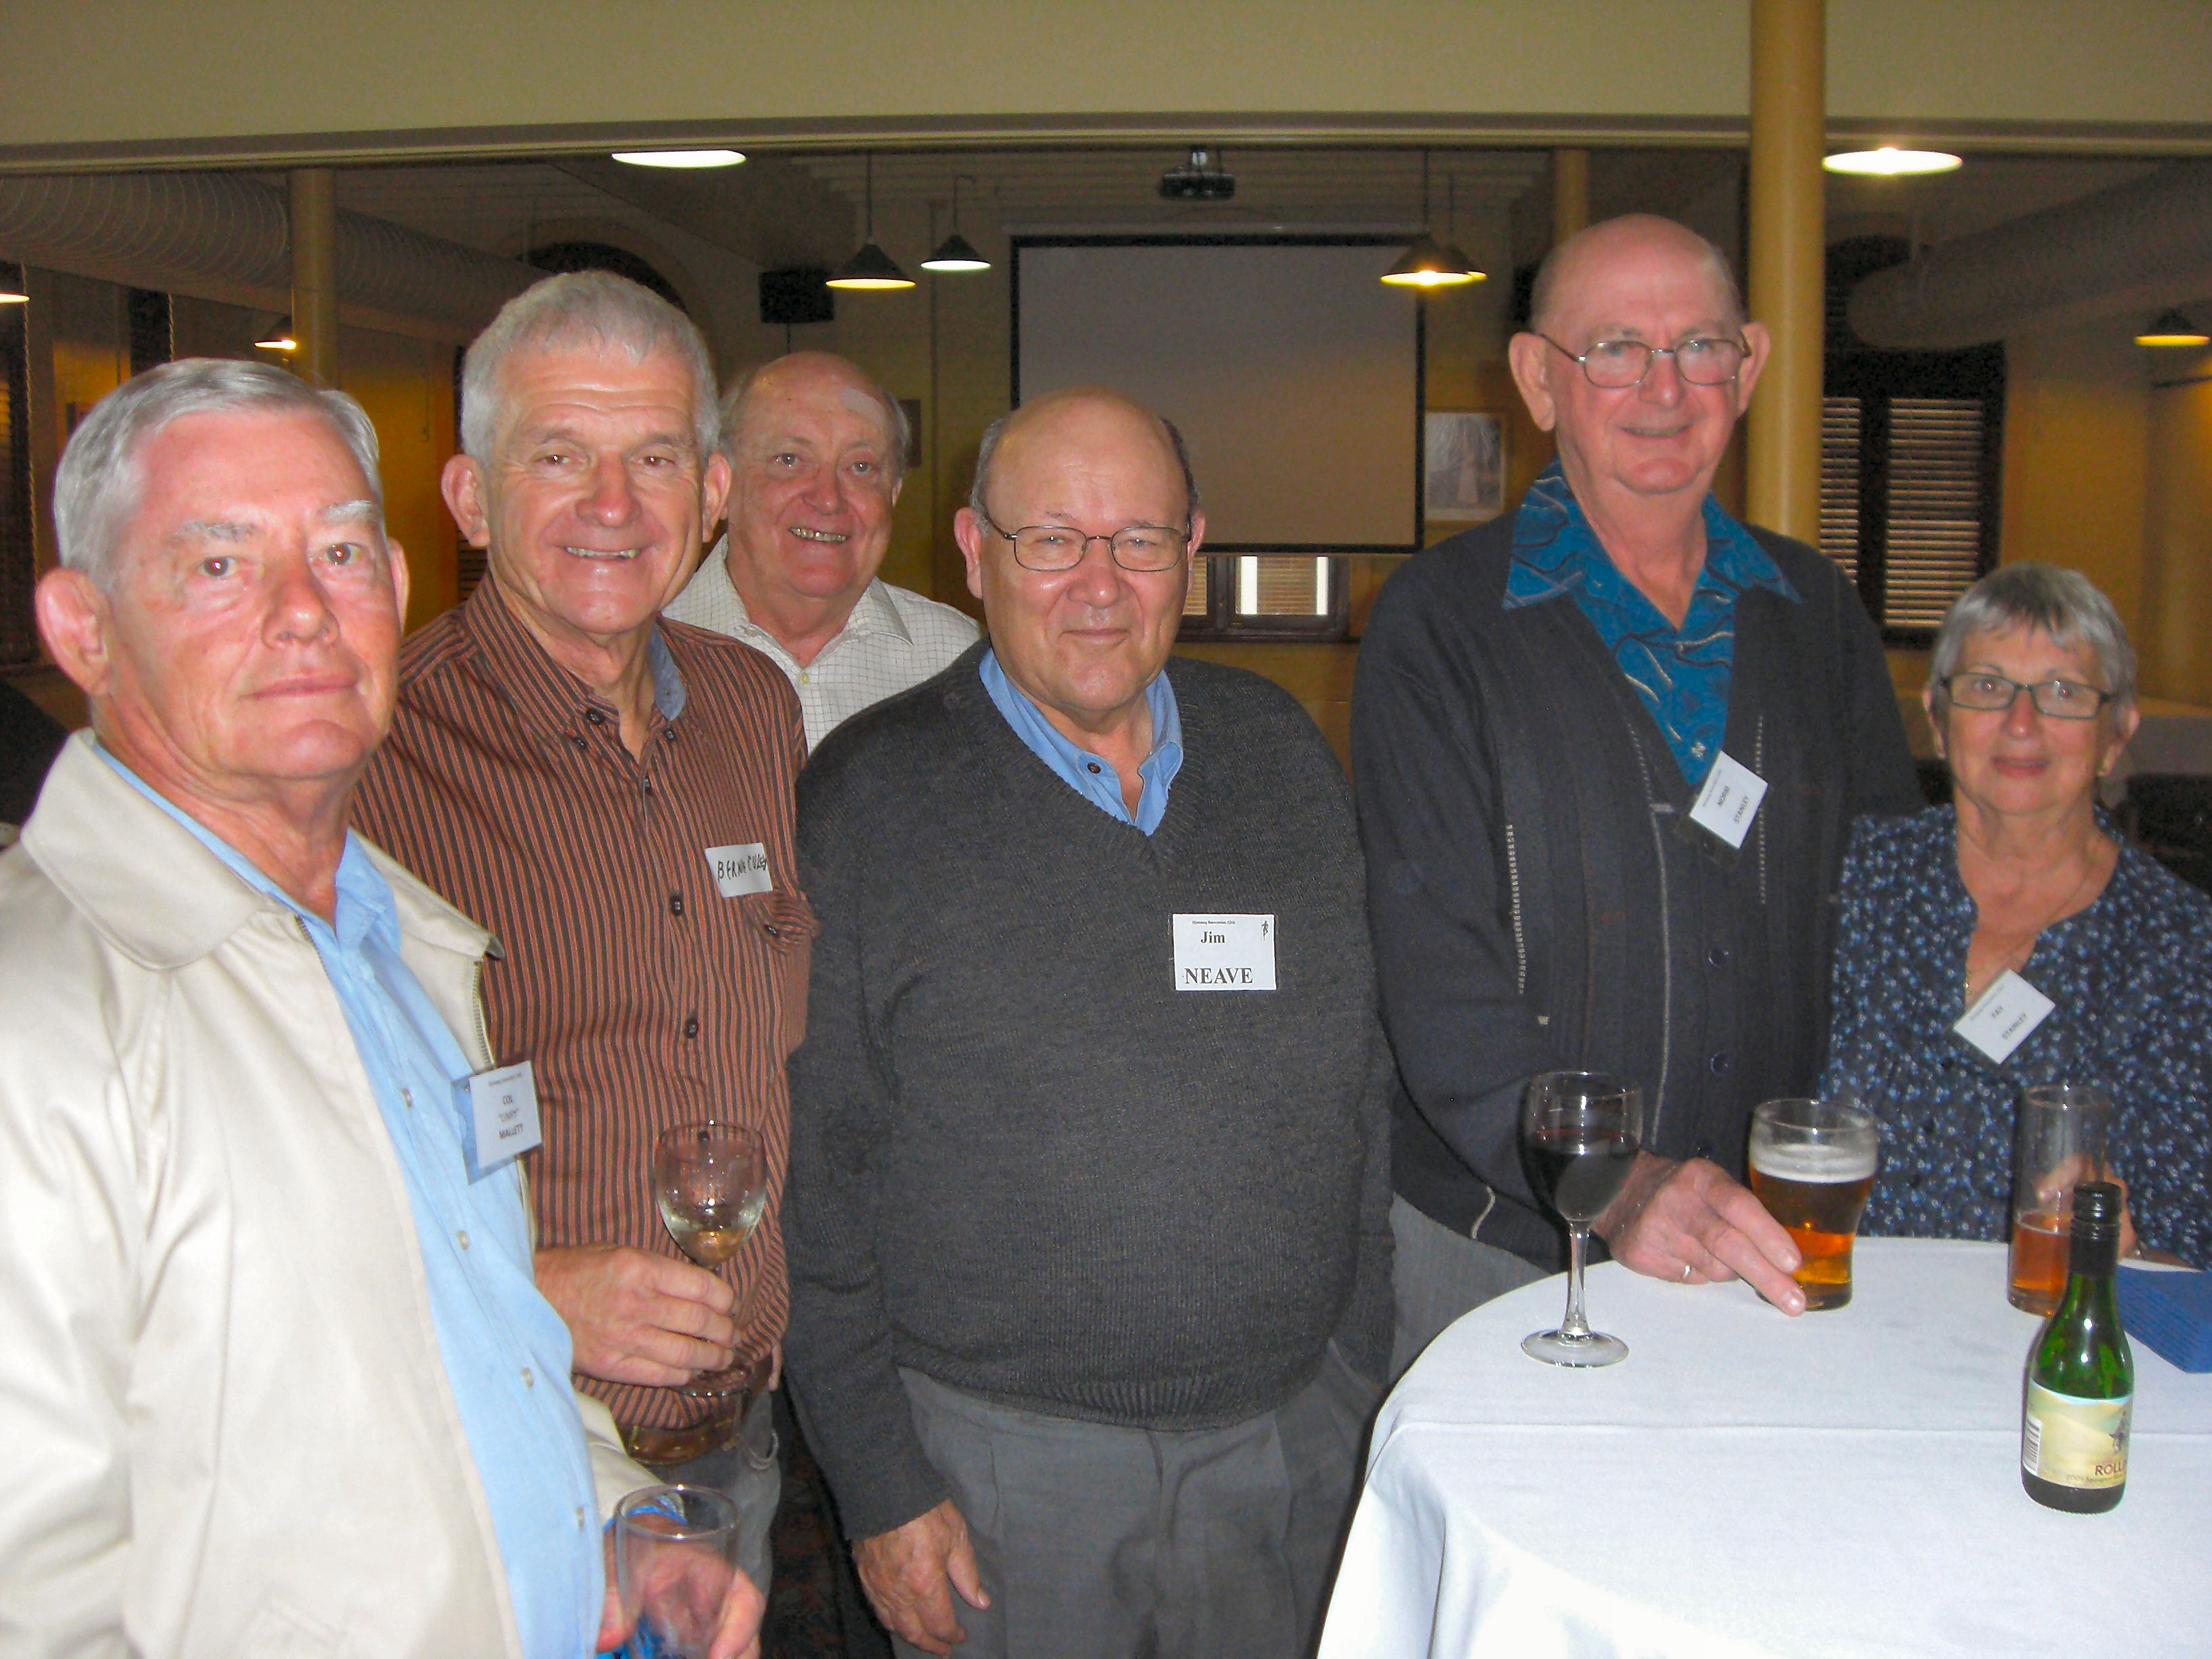 Col Limpy Mallett, Bernie Culley, Martin Lunn, Jim Neave, Norm and Fay Stanley